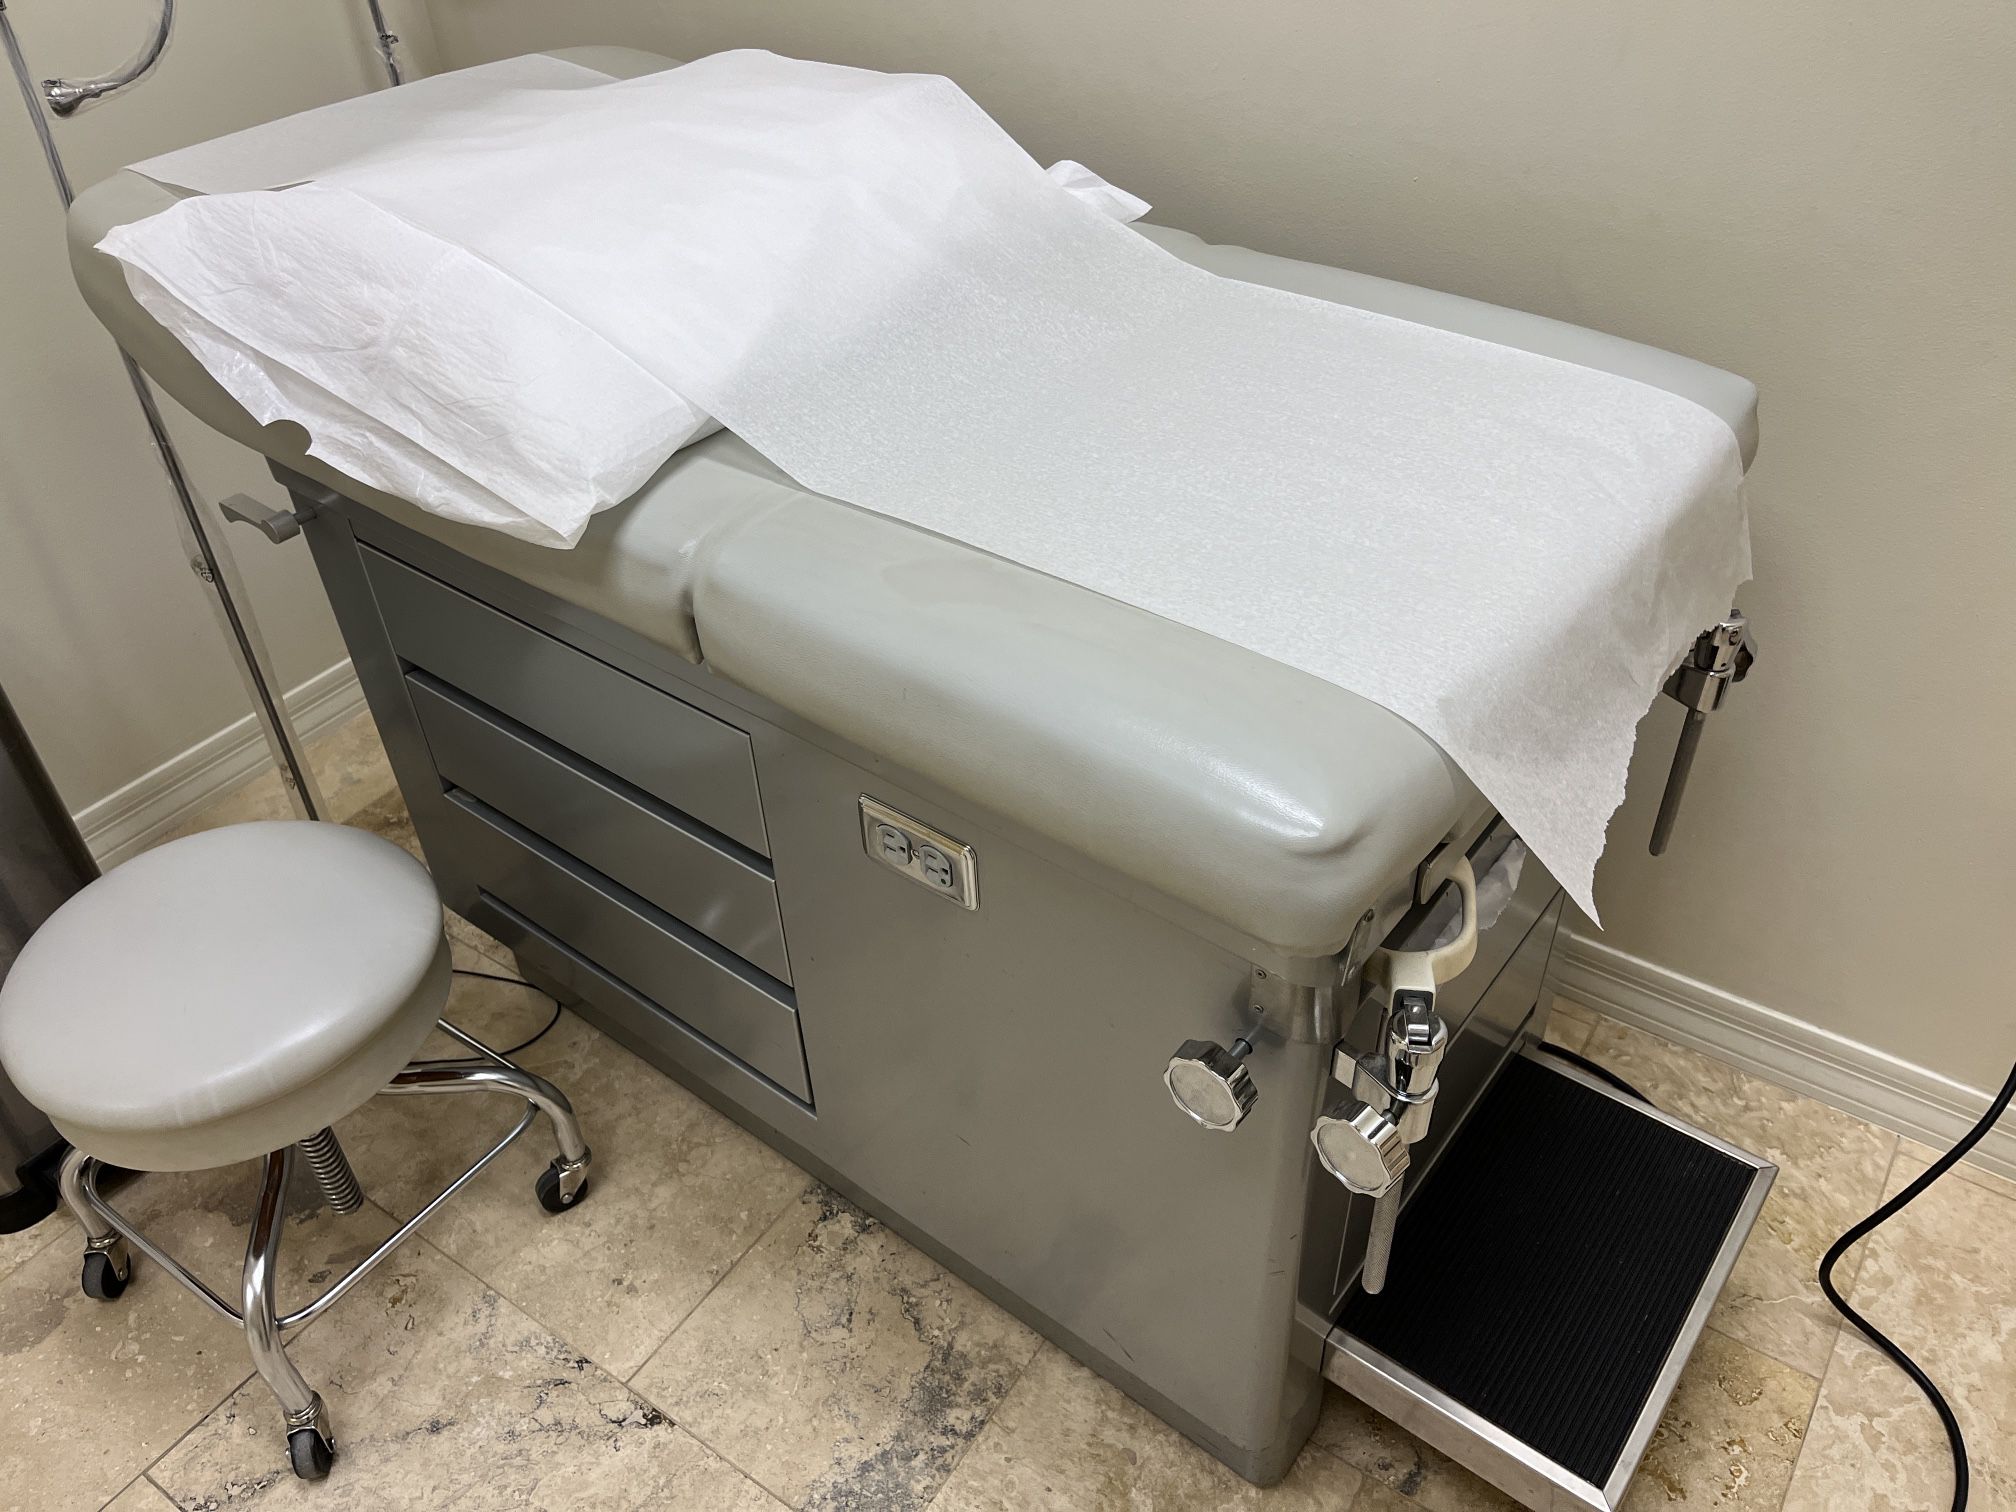 Free Medical exam table